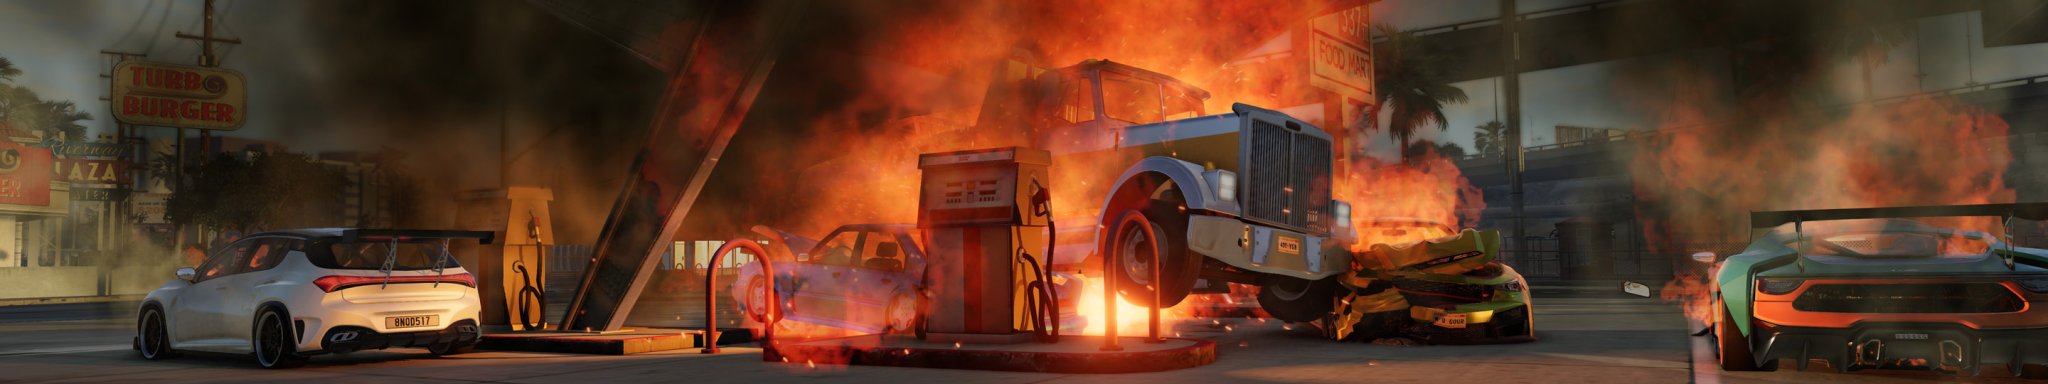 0 BeamNG Multiple VEHICLE Gas Station FIRE EXPLOSION copy.jpg